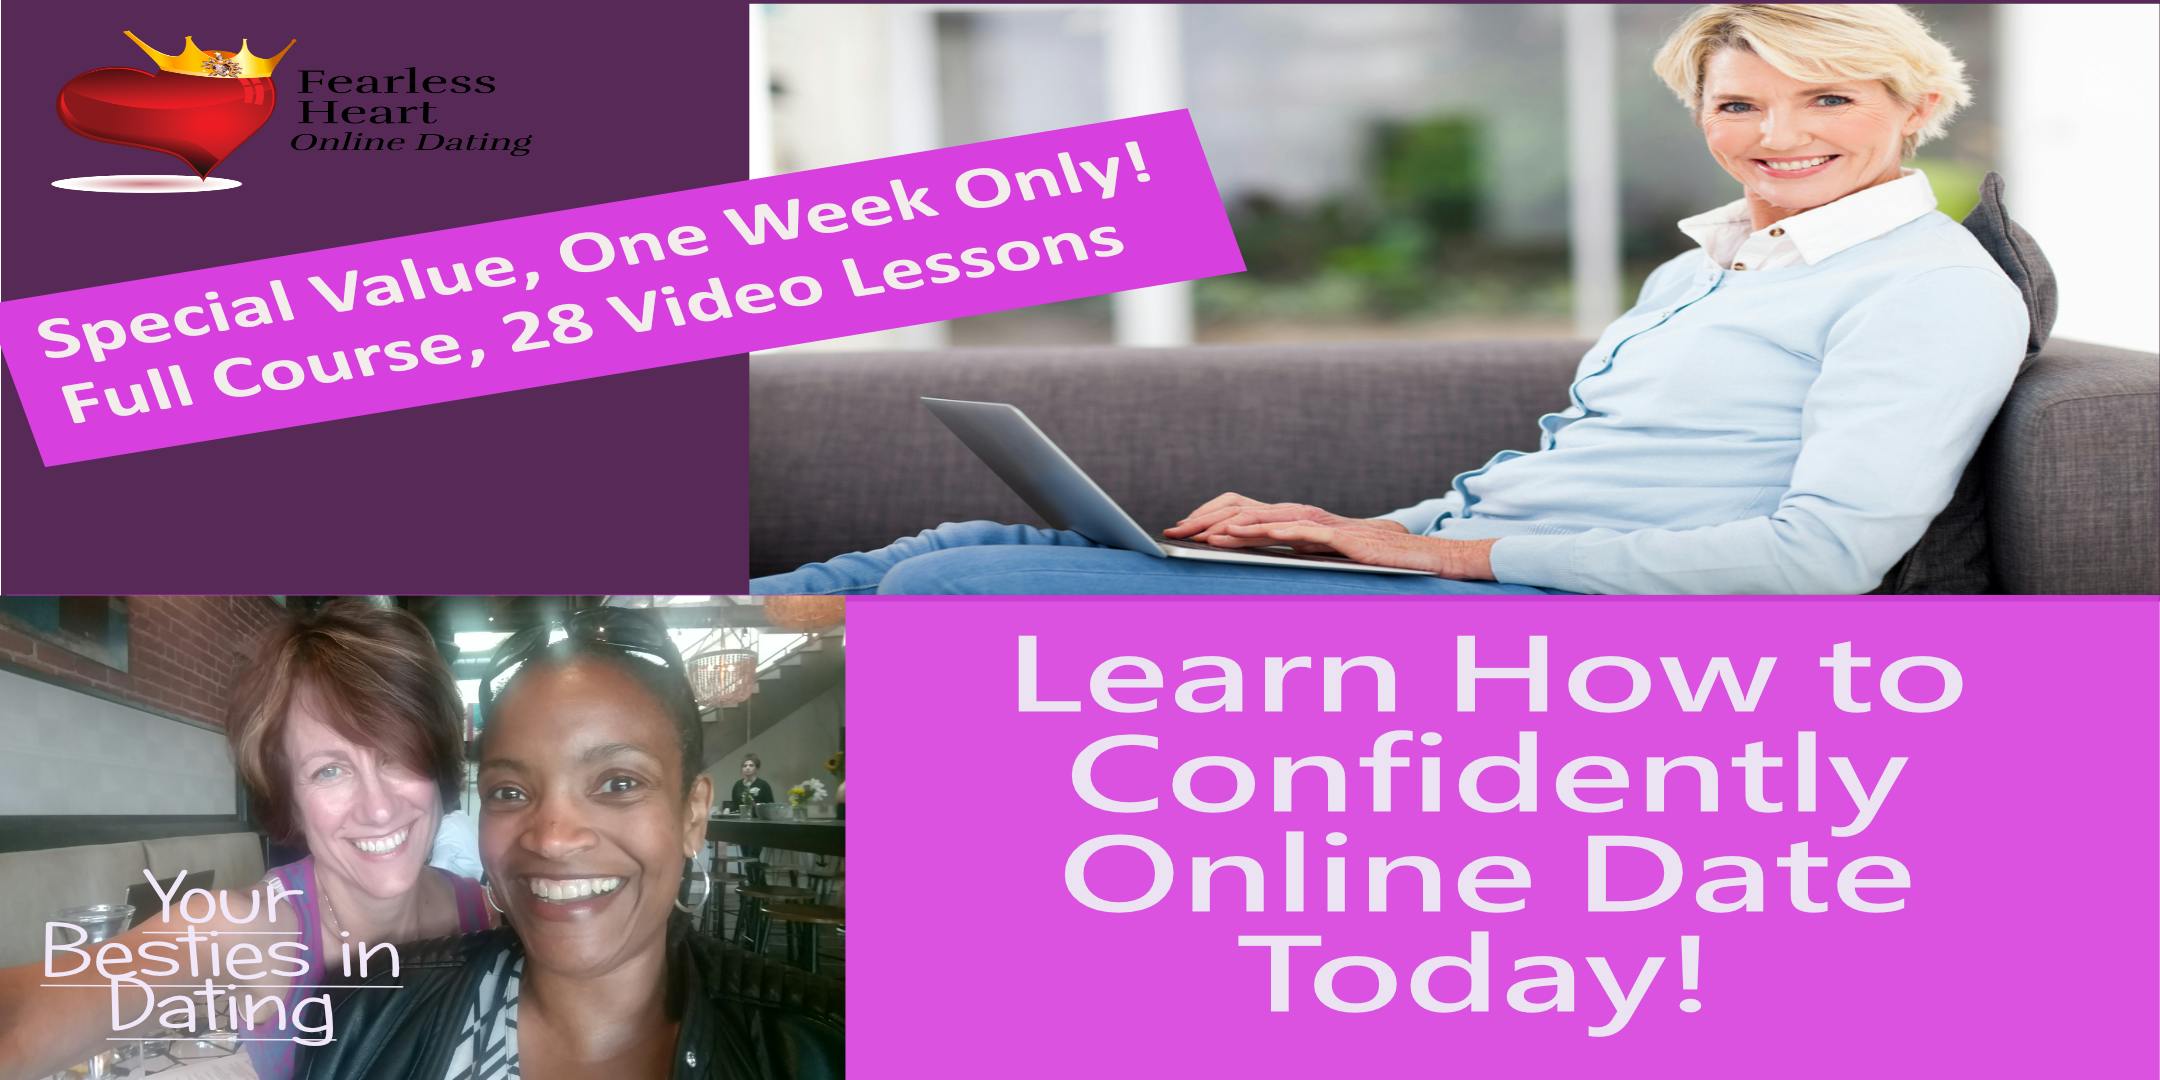 Rule Your Online Dating! for Women Over 45, Become Fearless - Online Course